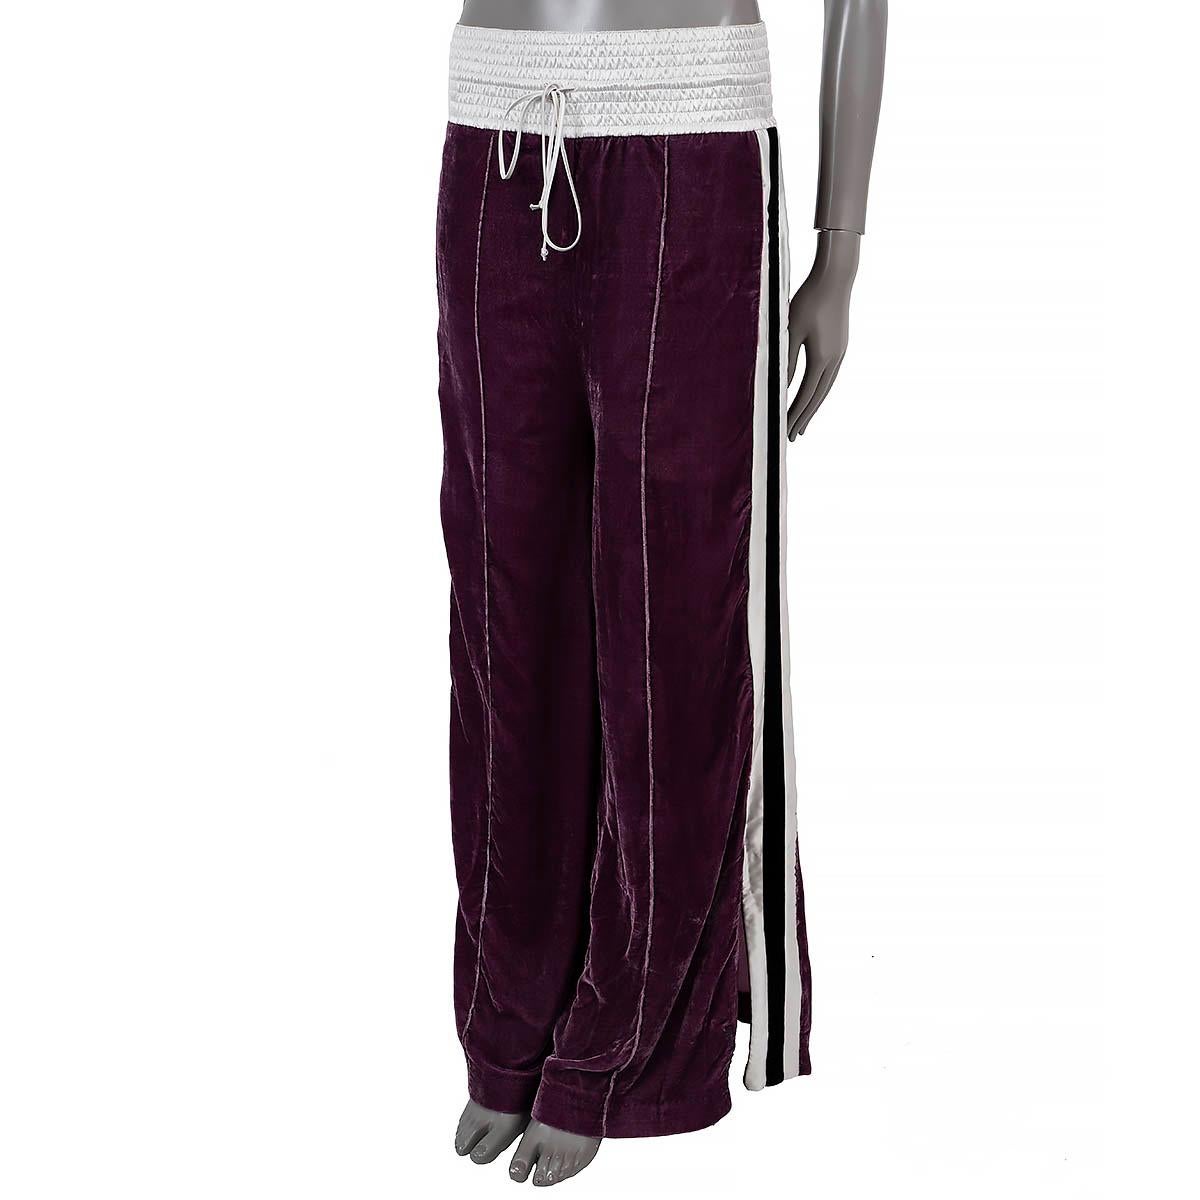 100% authentic OFF-WHITE satin-trim crushed velvet track pants in purple, black and grey cotton (82%) and silk (18%). Features Off-White logo embroidery, two zippers at the  hem and a drawstring waist. Two side slit pockets. Has been worn an is